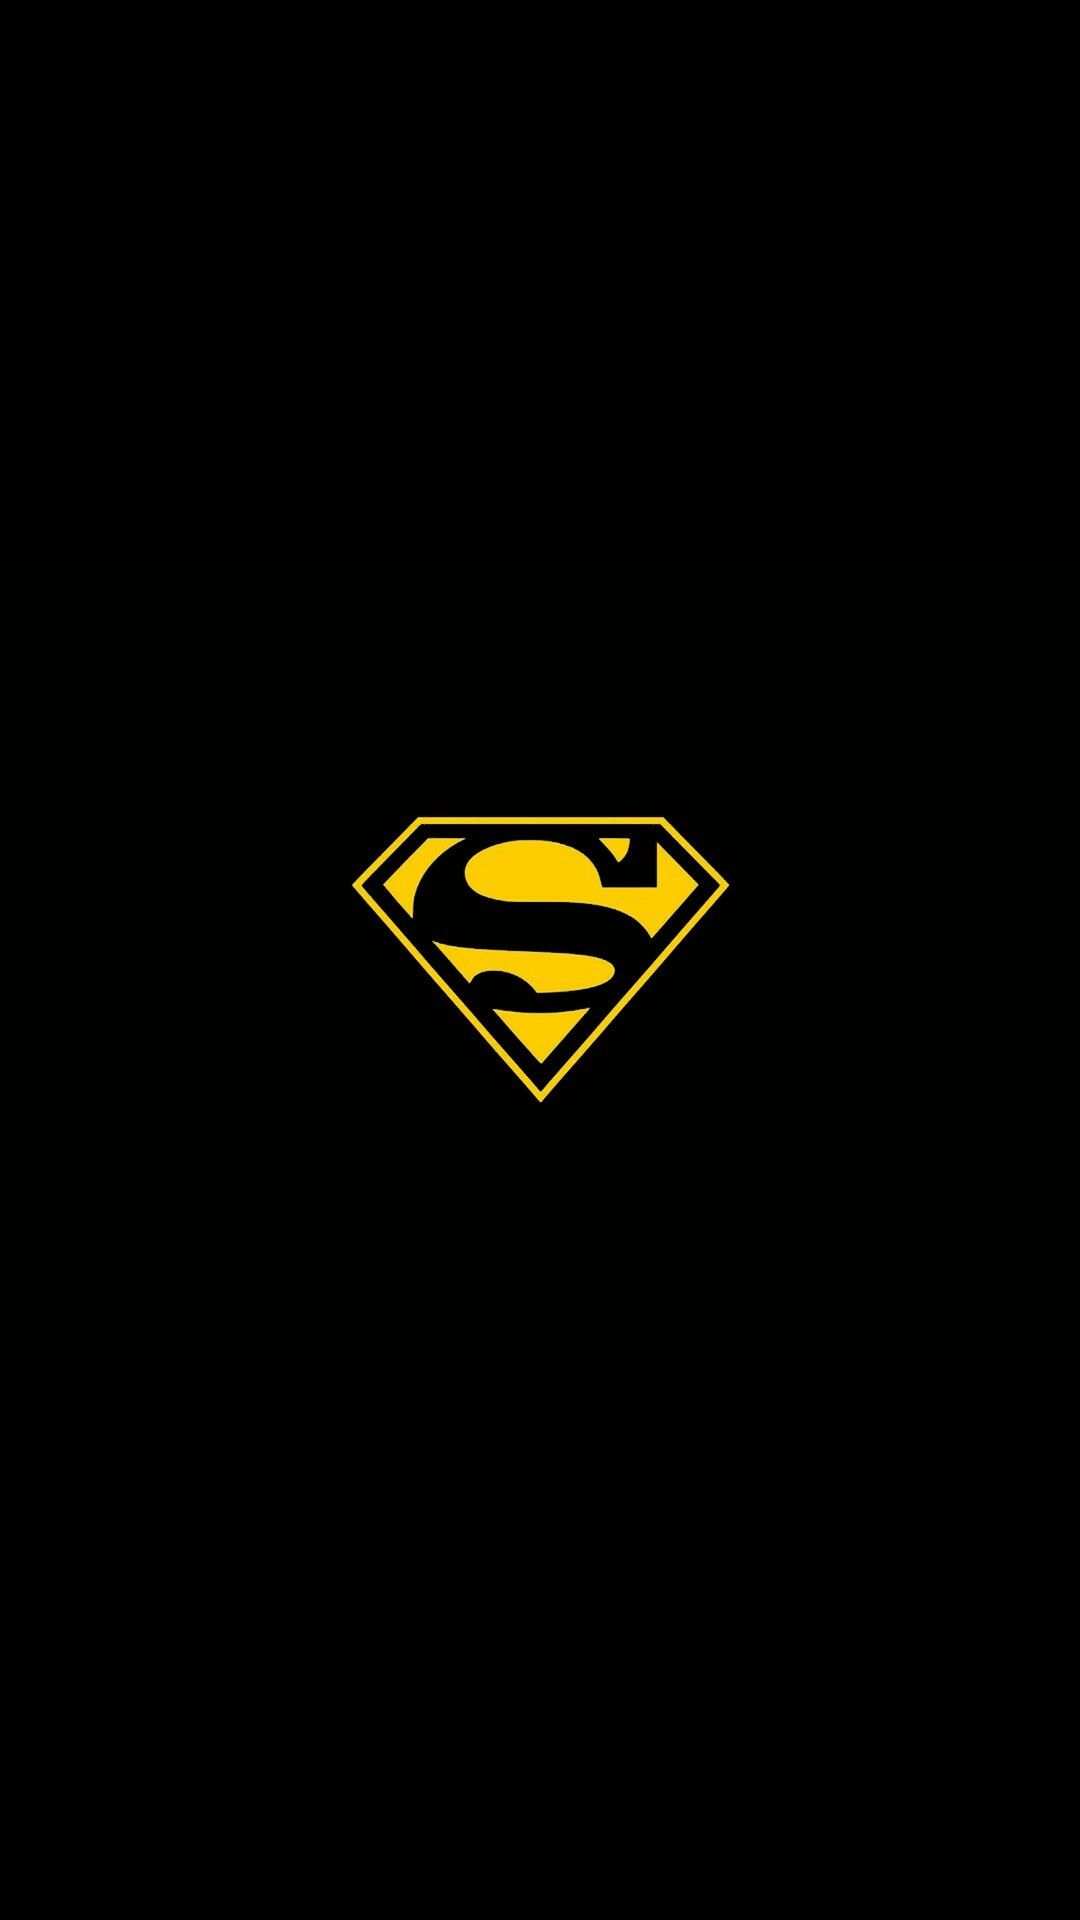 List of New Hero Logo Wallpaper for iPhone 11 Pro Today uploade by getwallpaper.com. Free Smartphone Wallpaper